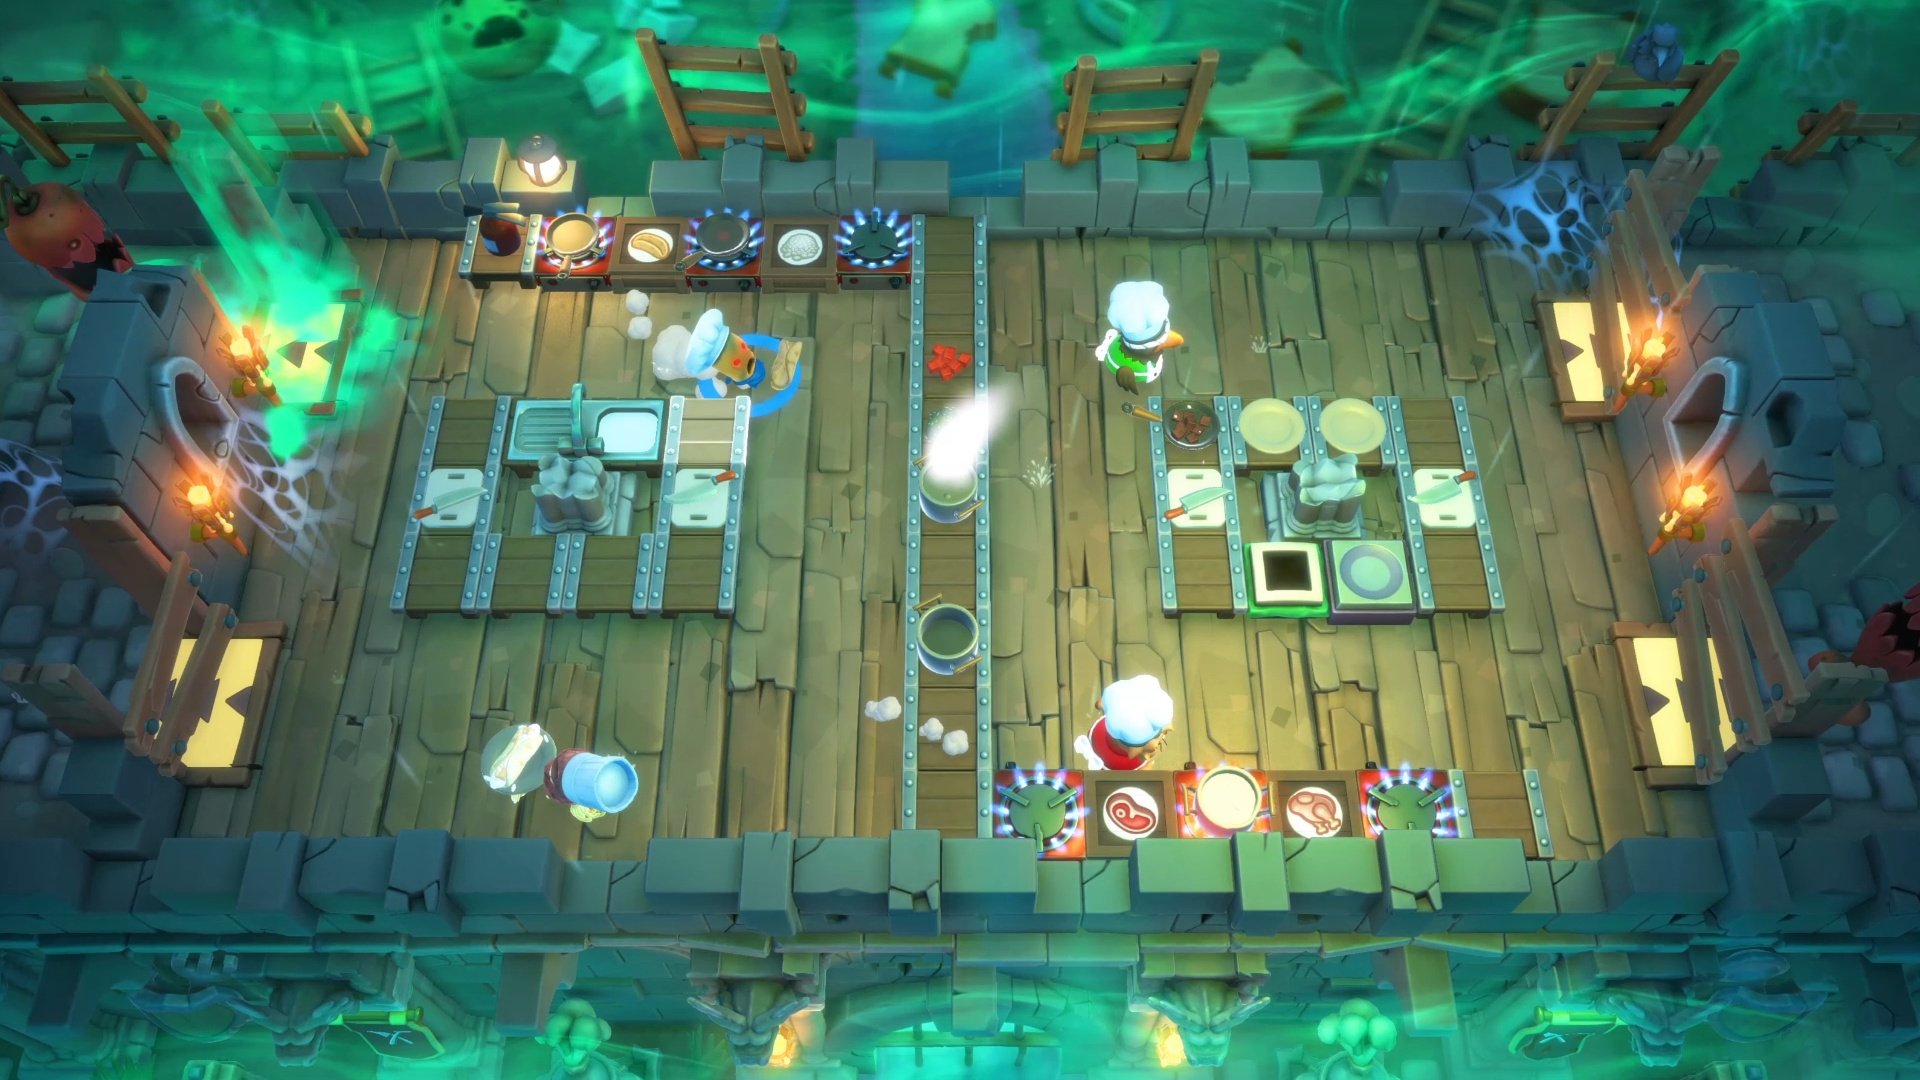 Overcooked: All You Can Eat brings culinary co-op action to PS5